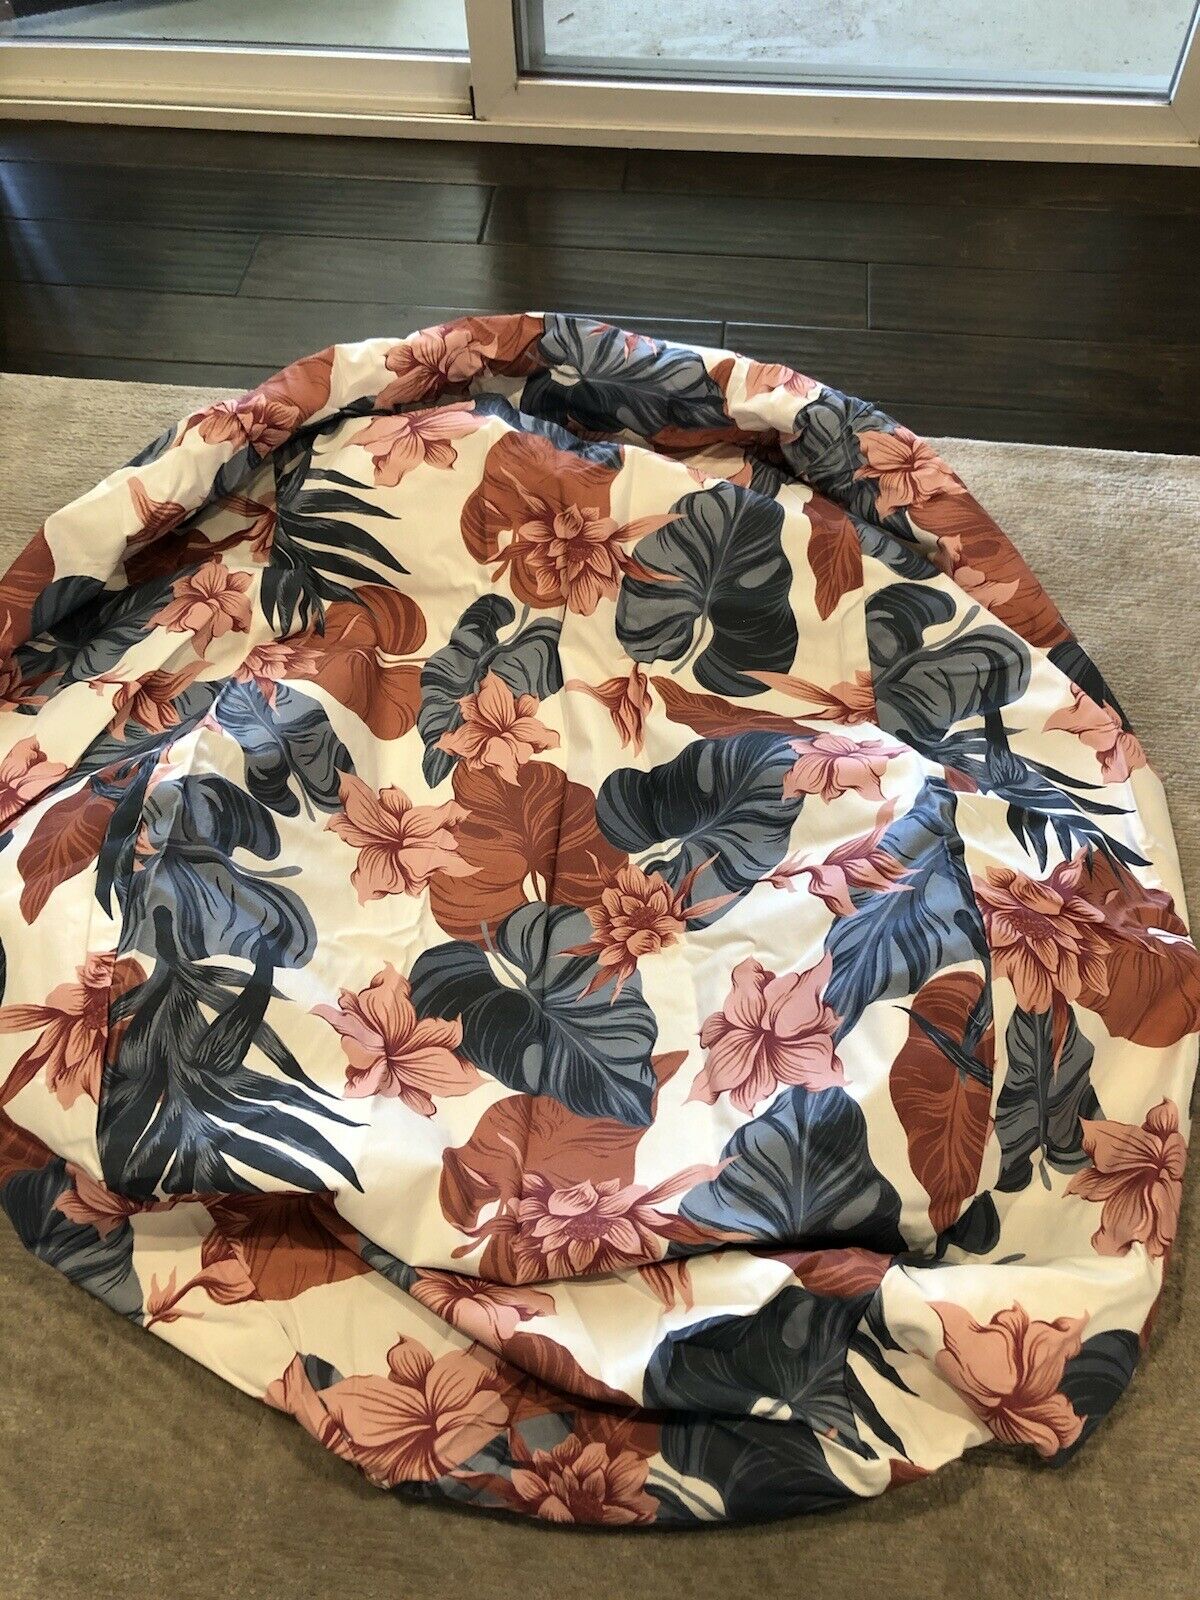 New Pottery Barn Teen Roxy Bean Bag In Sunsoaked - Large Floral Cover Only